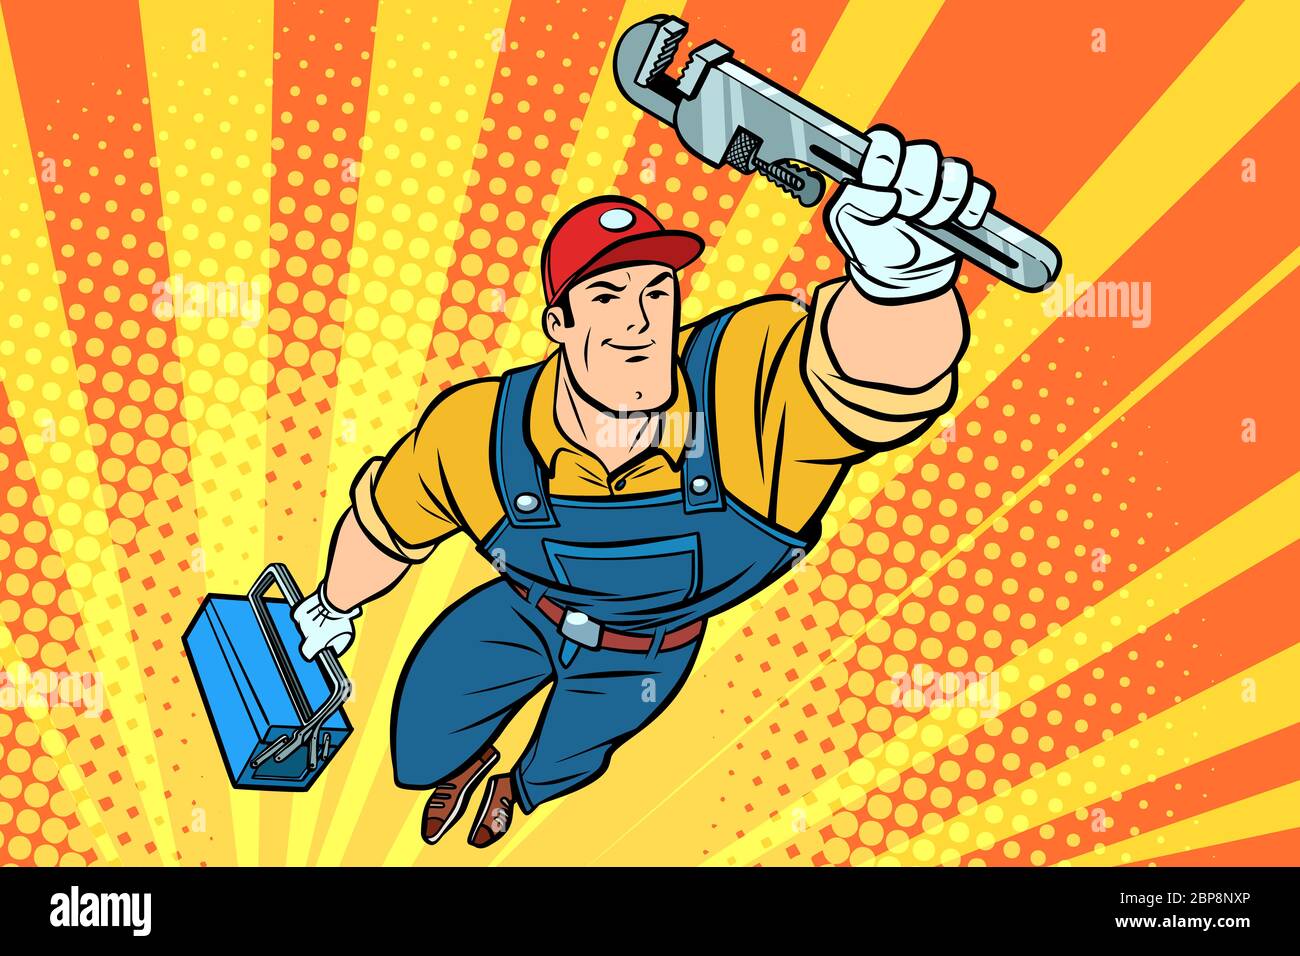 Male superhero plumber with a wrench. Hand drawn illustration cartoon pop art retro vector style Stock Photo